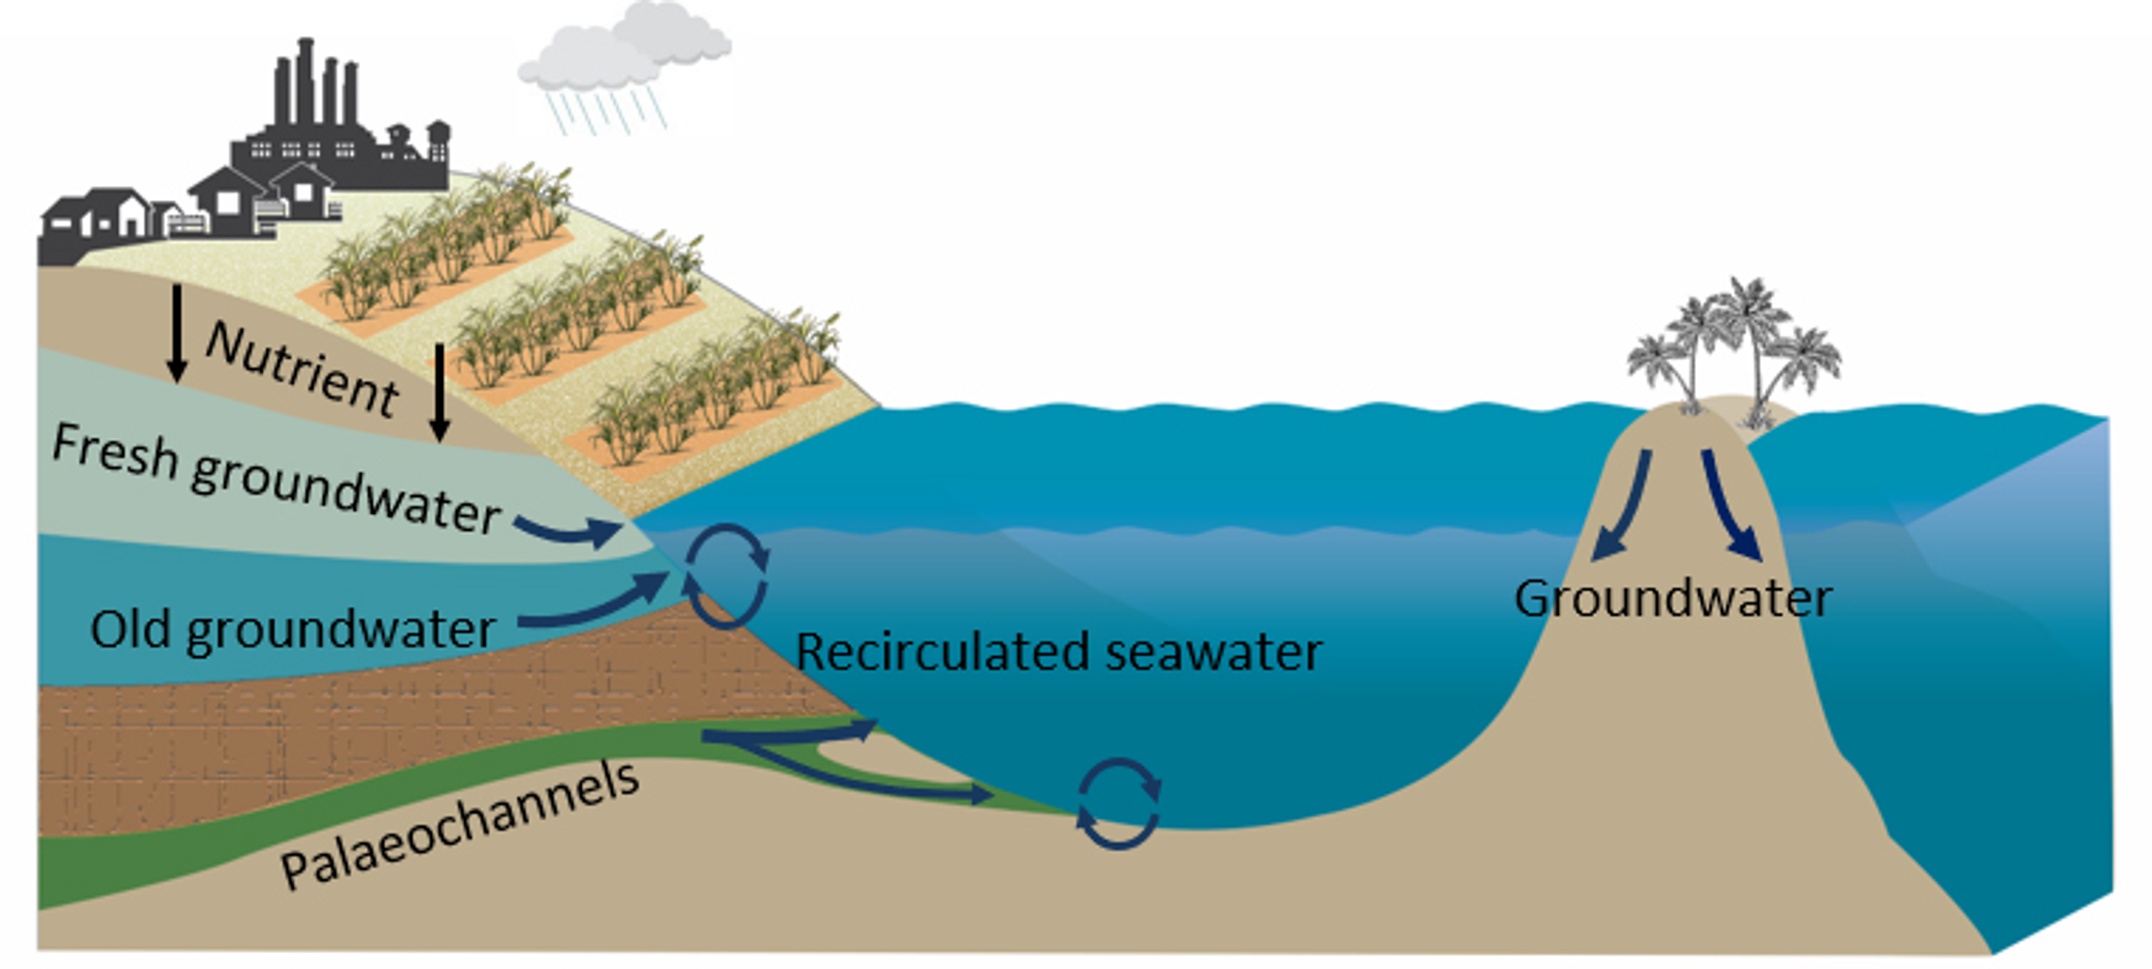 Groundwater sources on GBR_credit Douglas Tait